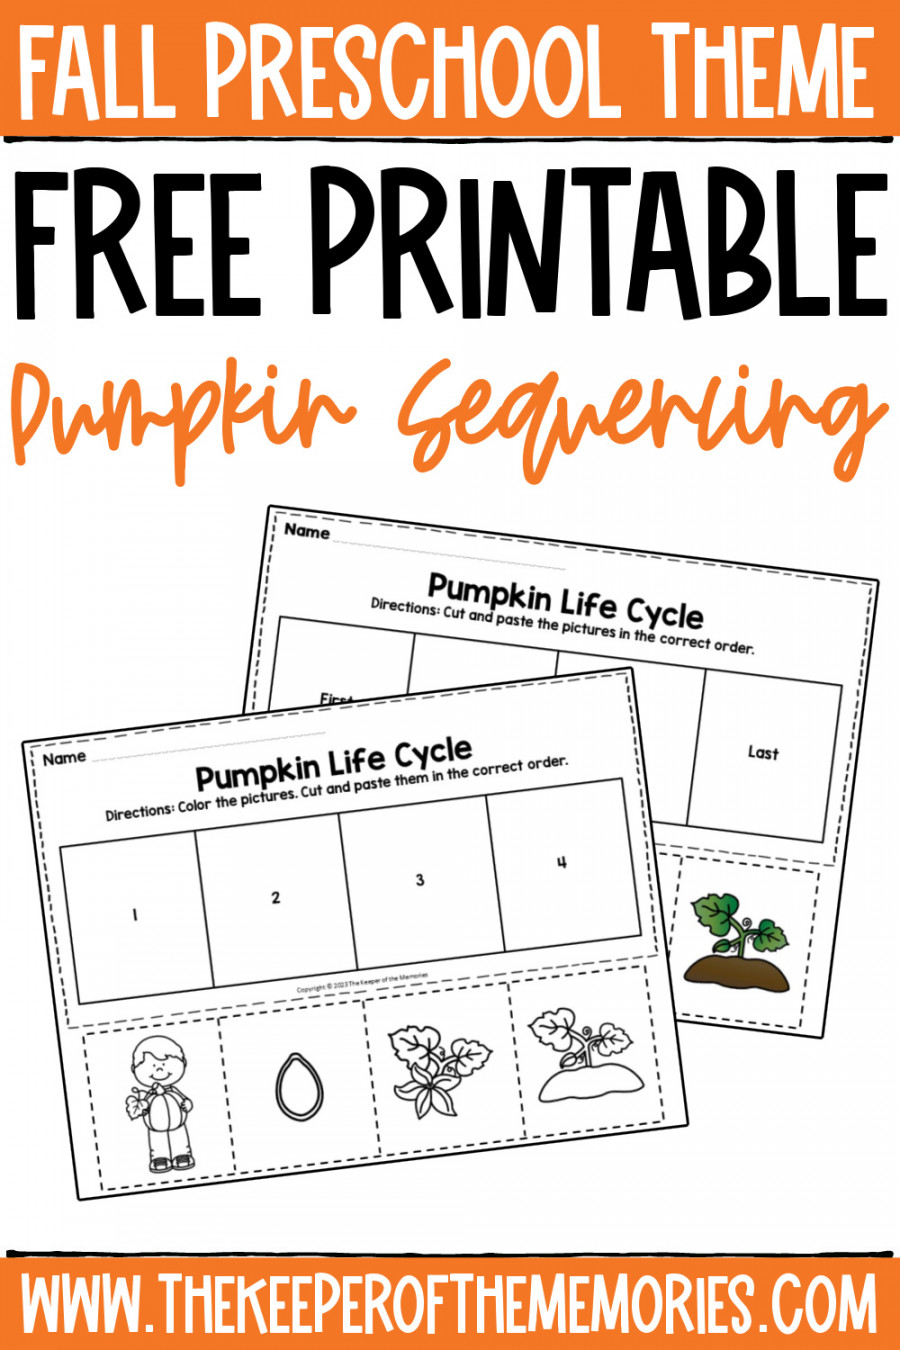 Free Printable Pumpkin Life Cycle Sequencing Worksheets - The